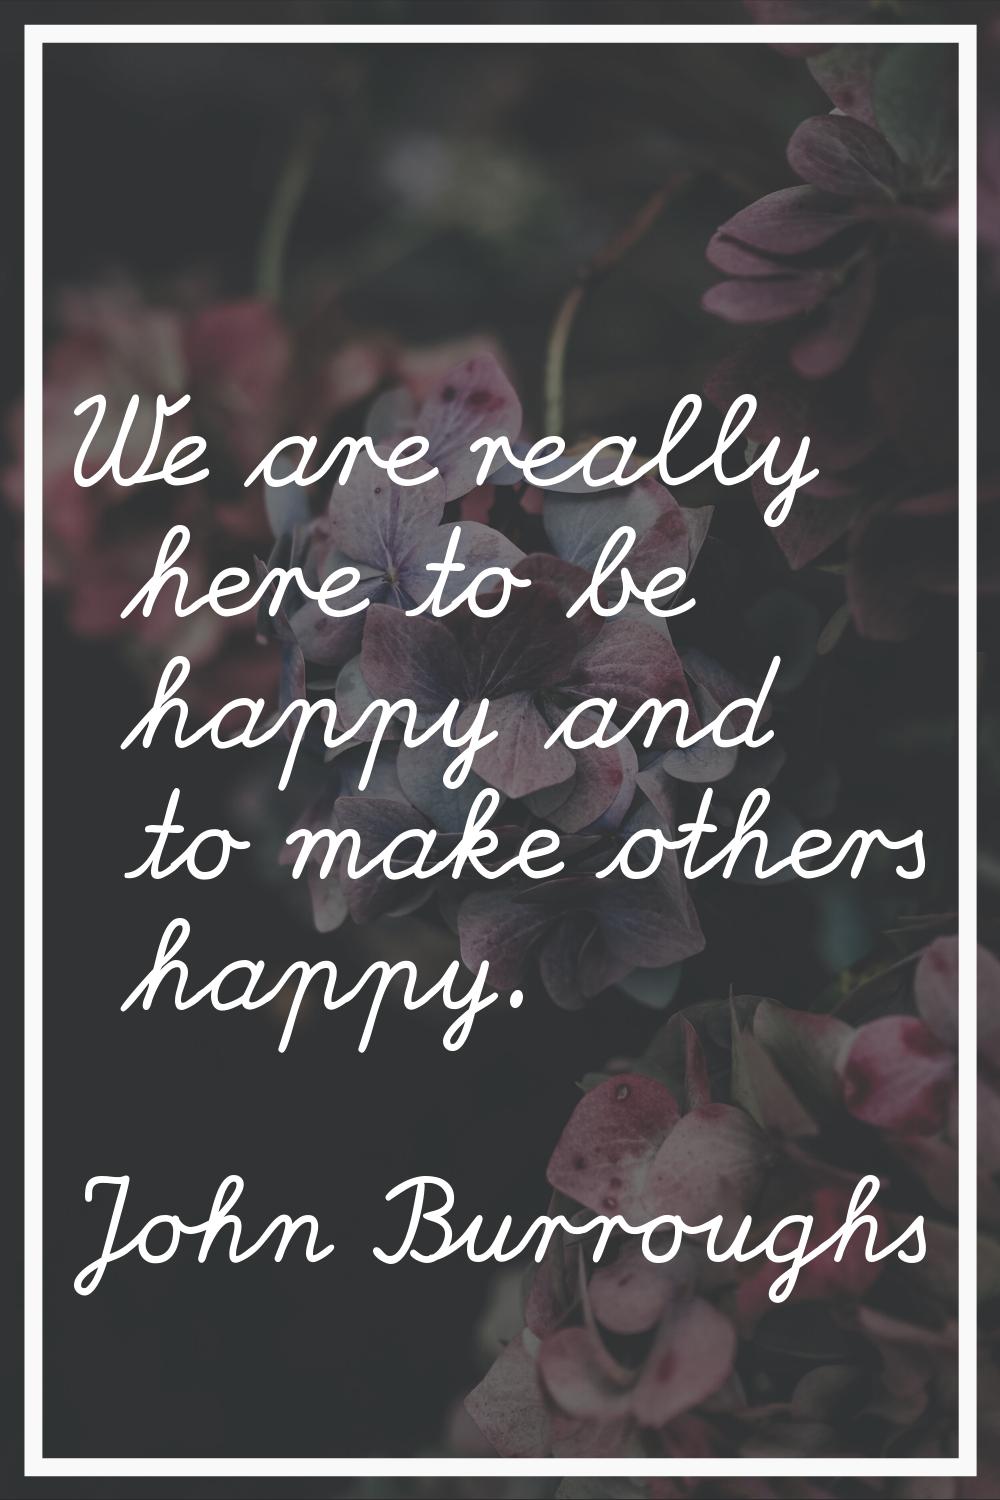 We are really here to be happy and to make others happy.